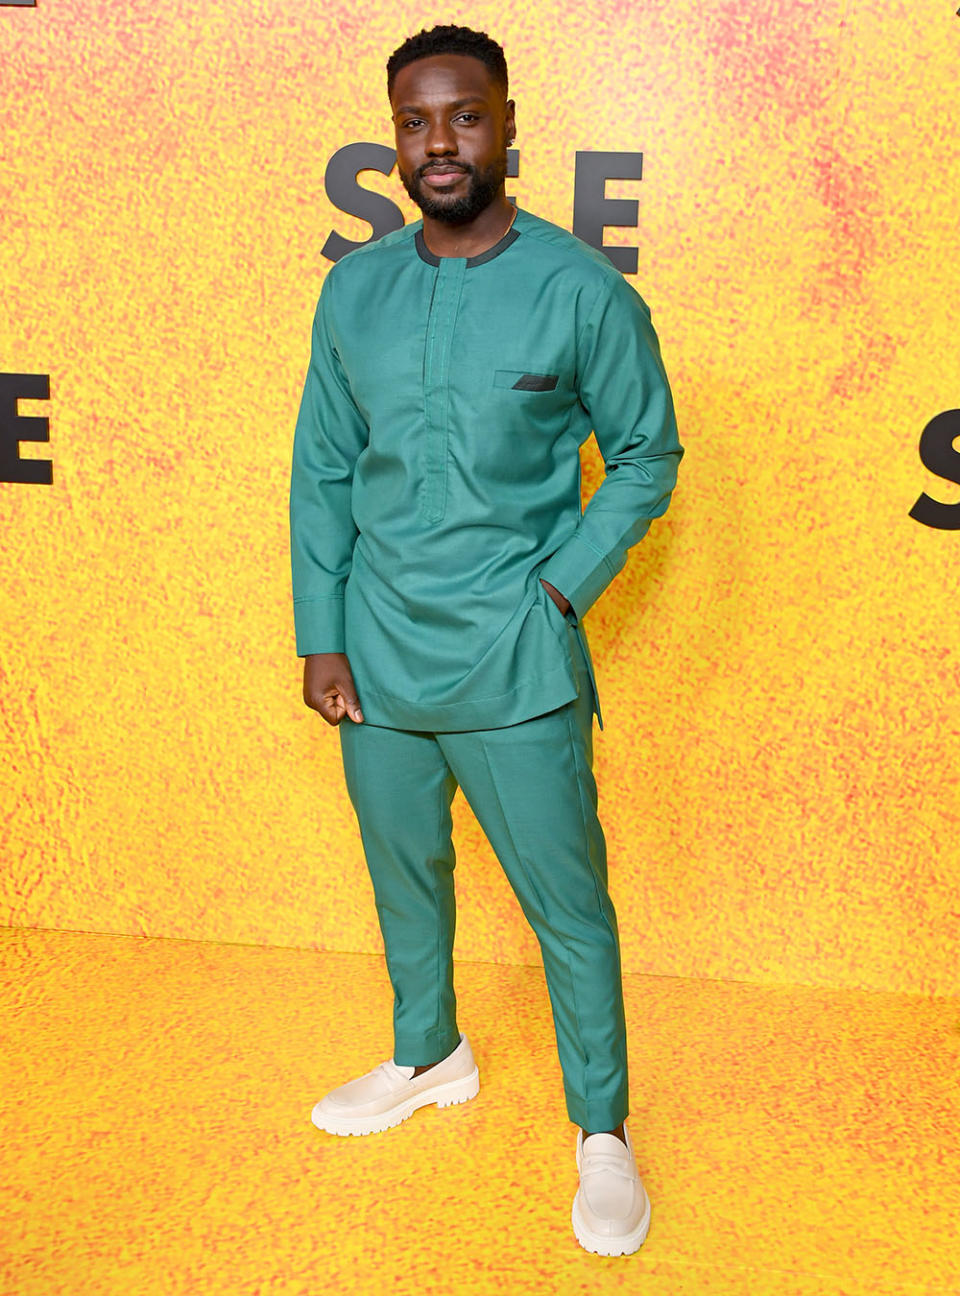 Dayo Okeniyi attends the Apple TV+ Original Series "See" Season 3 Premiere at DGA Theater Complex on August 23, 2022 in Los Angeles, California.